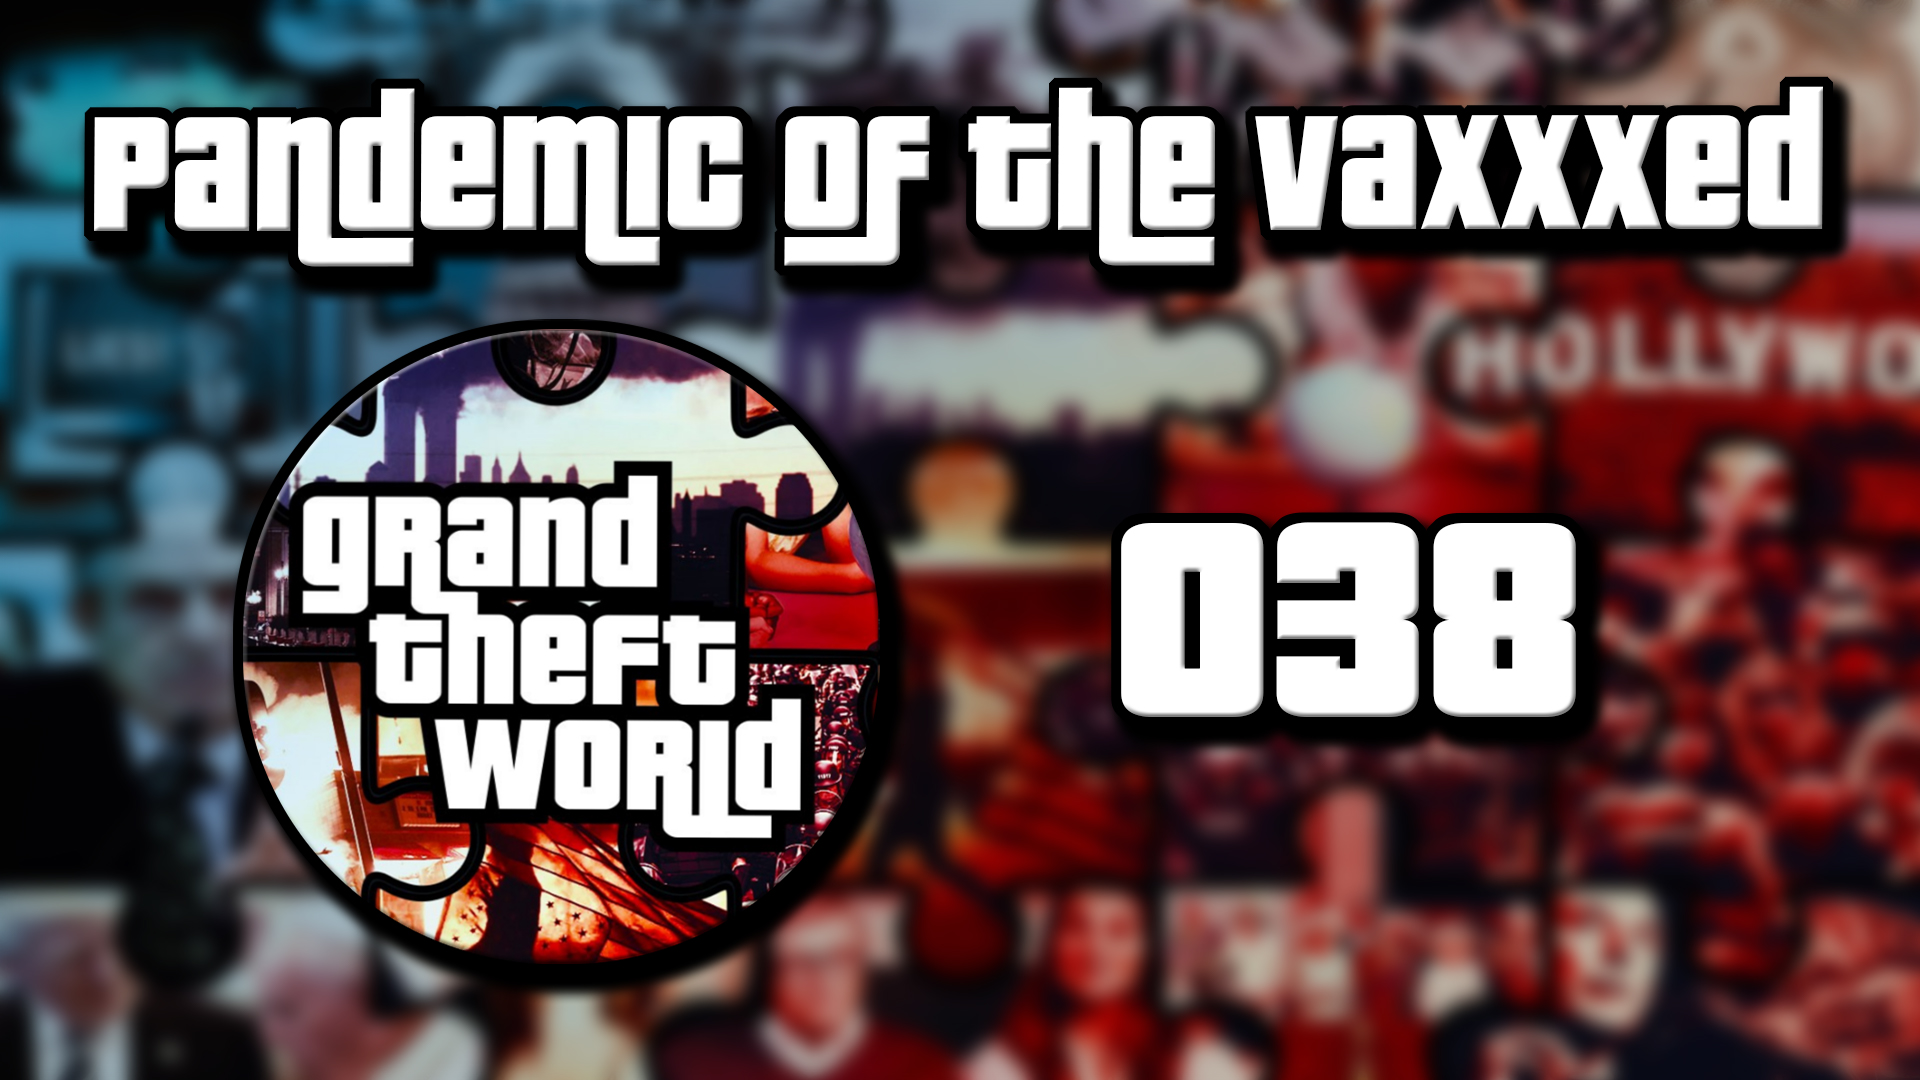 Grand Theft World Podcast 038 | Pandemic of The Vaxxxed